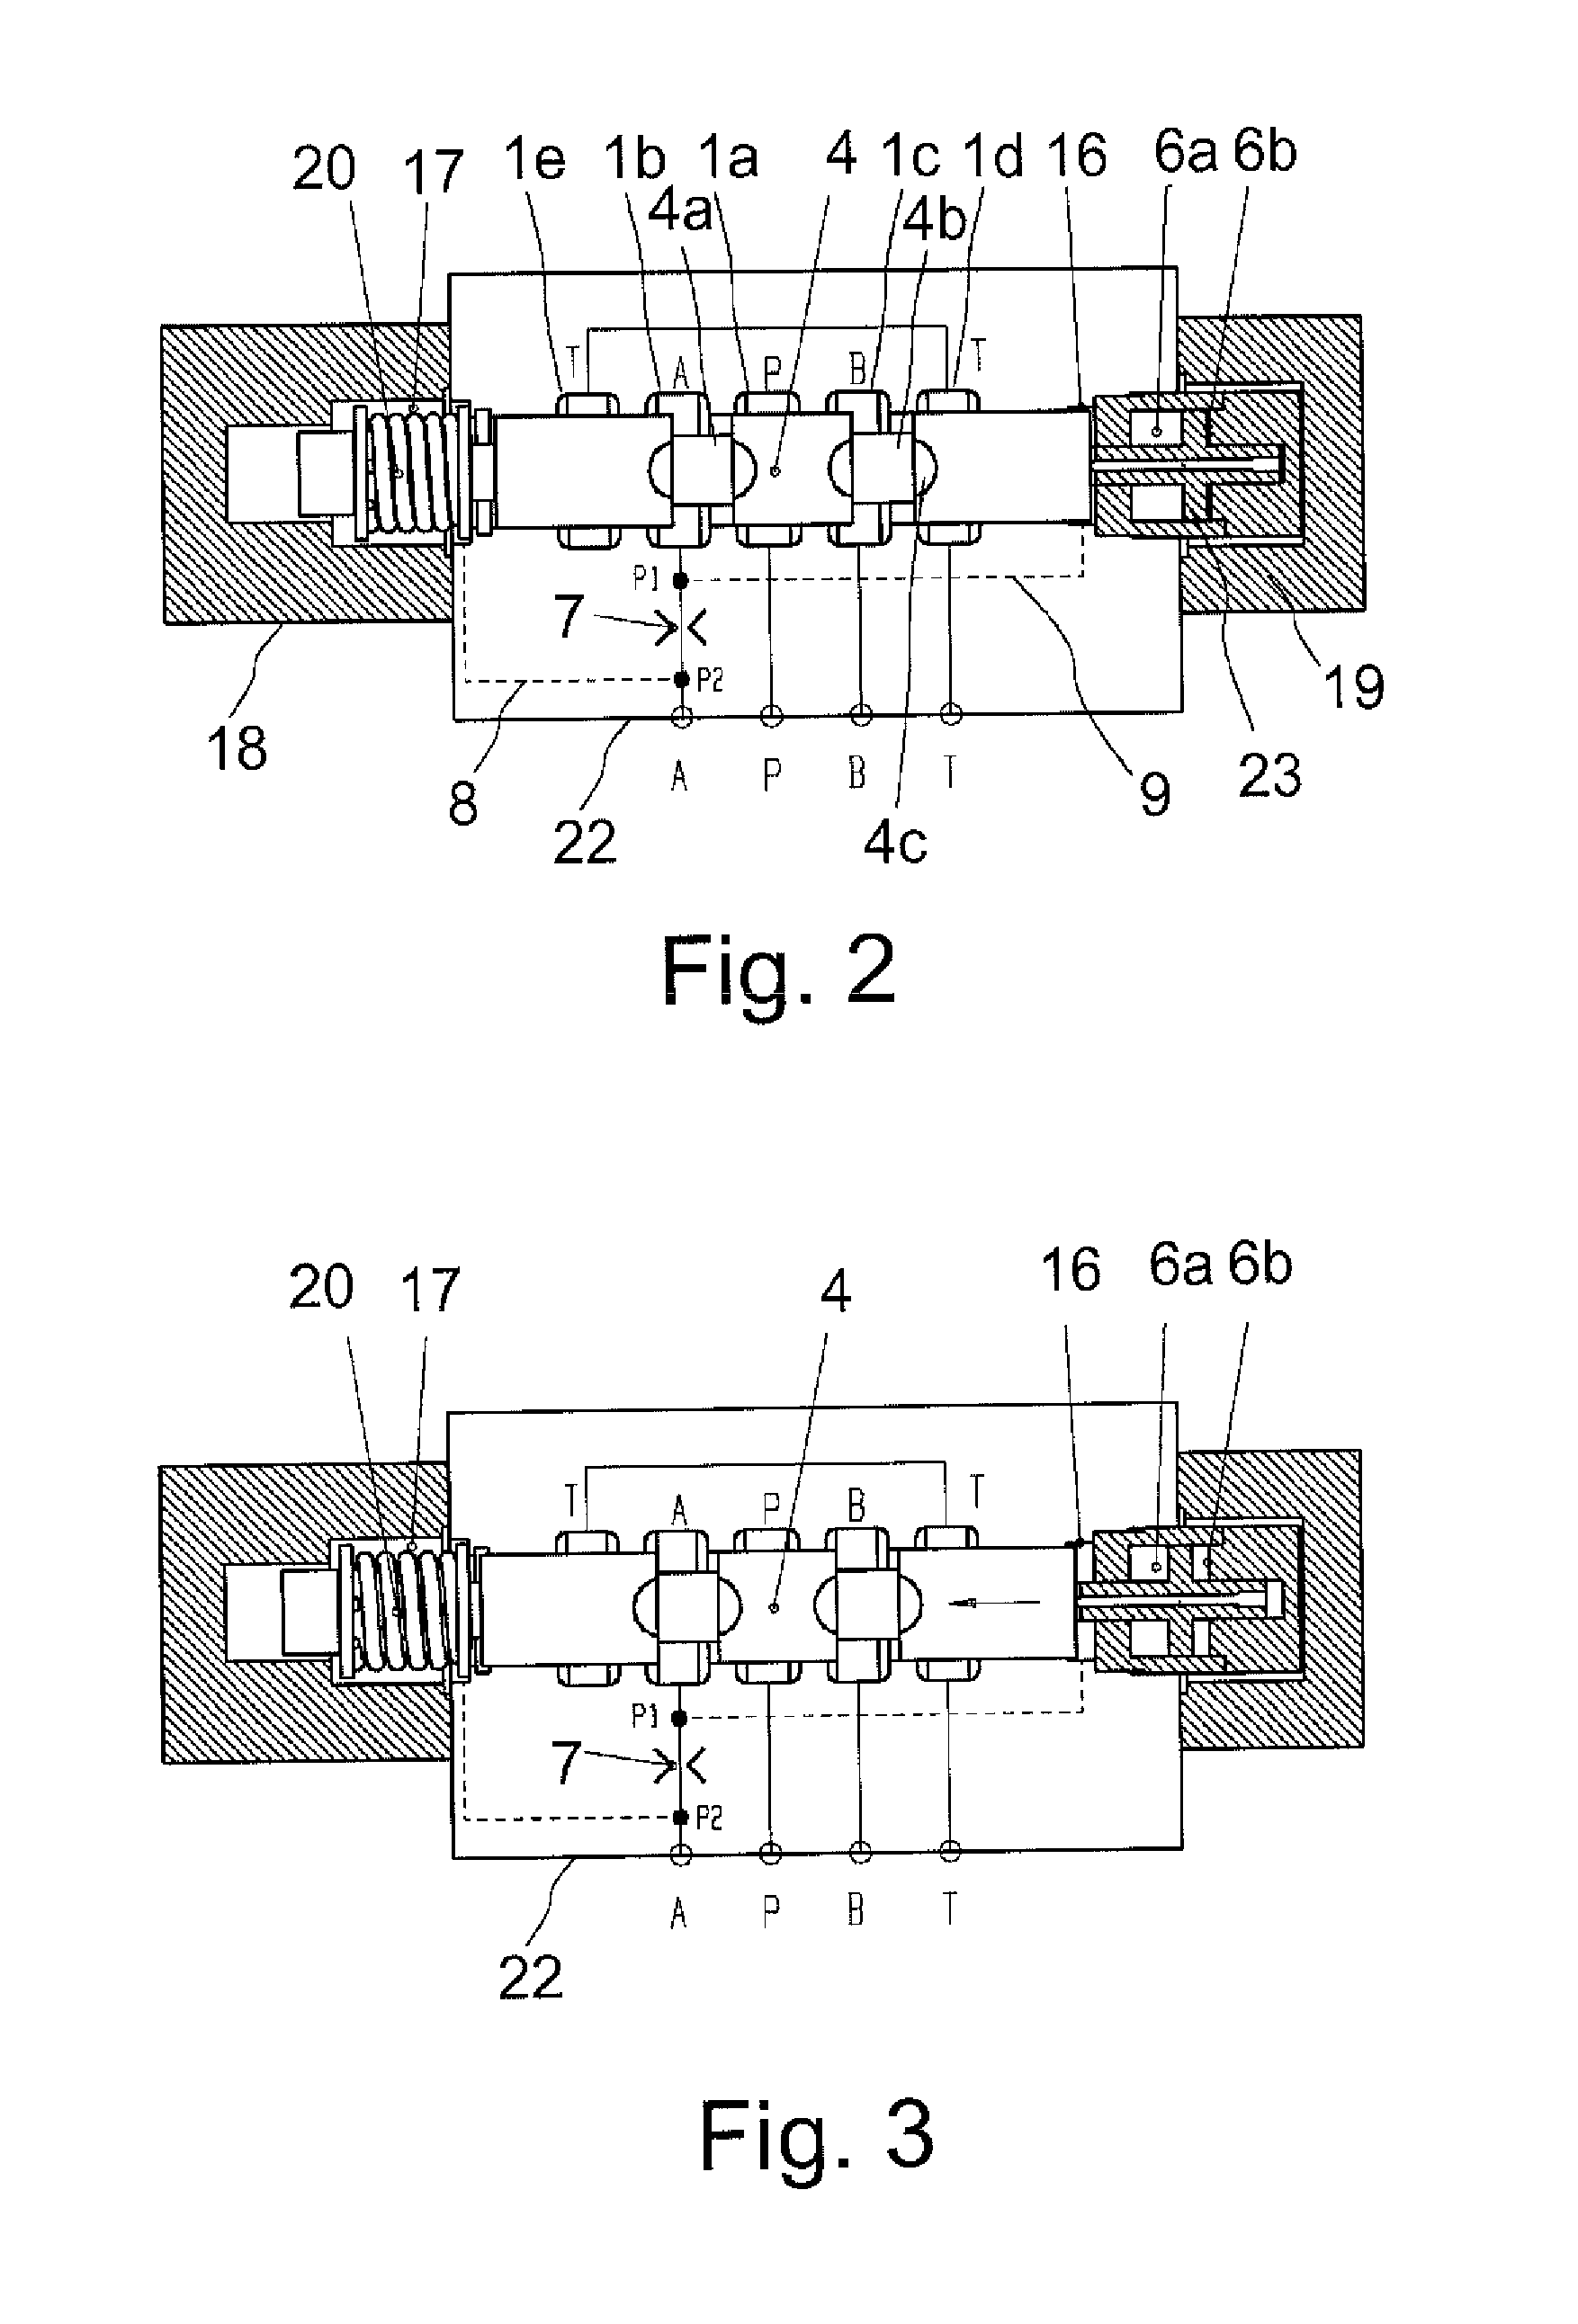 Directional valve equipped with pressure compensation